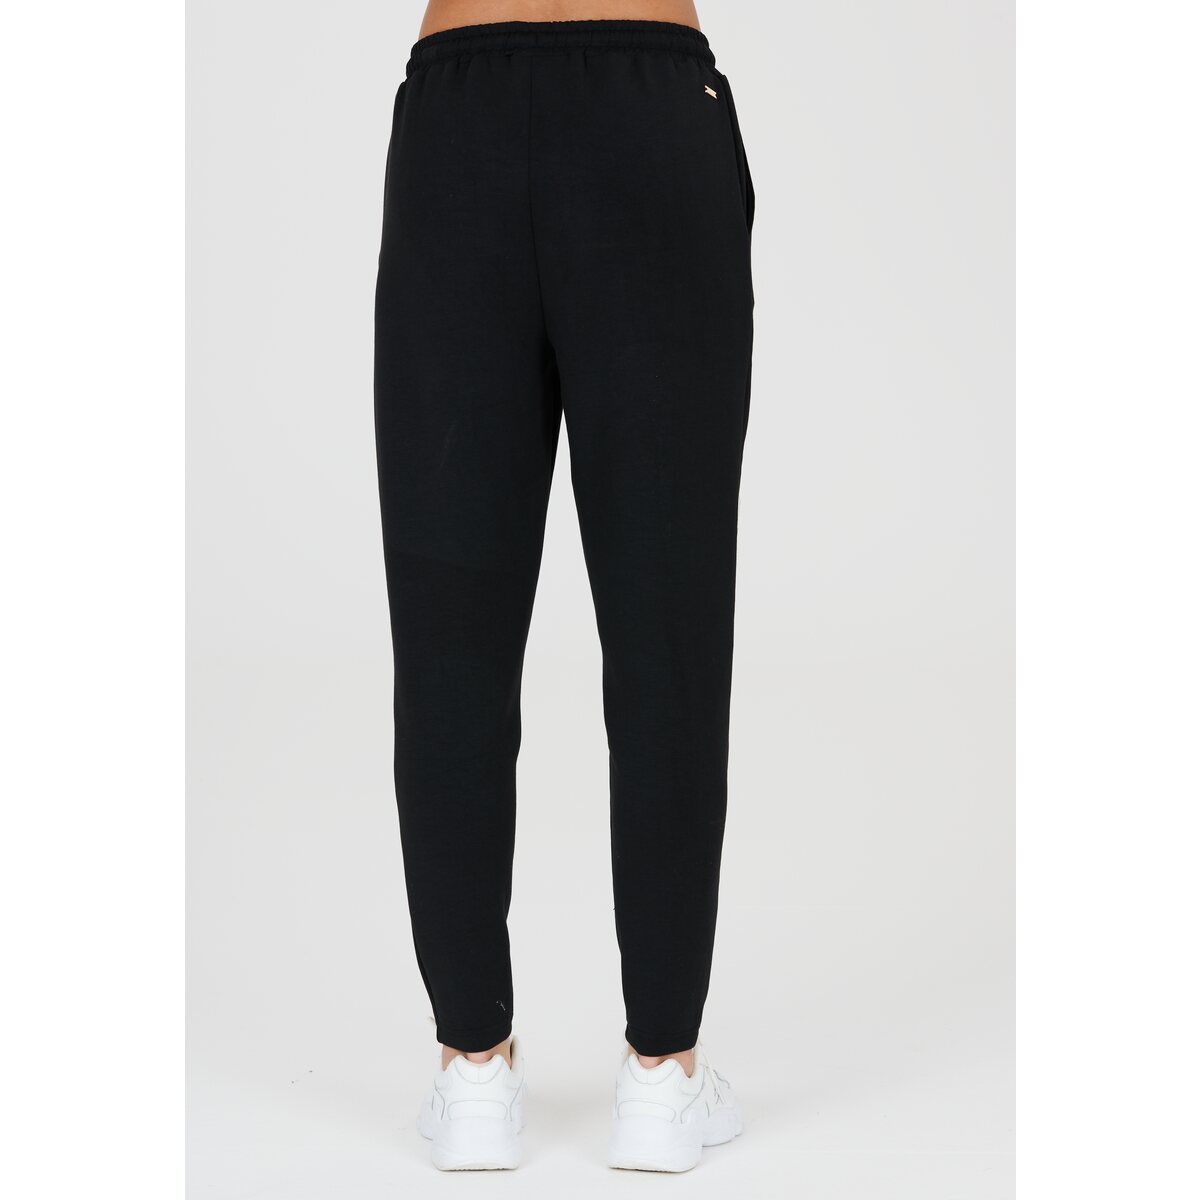 Athlecia Jacey V2 Womenswear Sweat Pants - Black 5 Shaws Department Stores